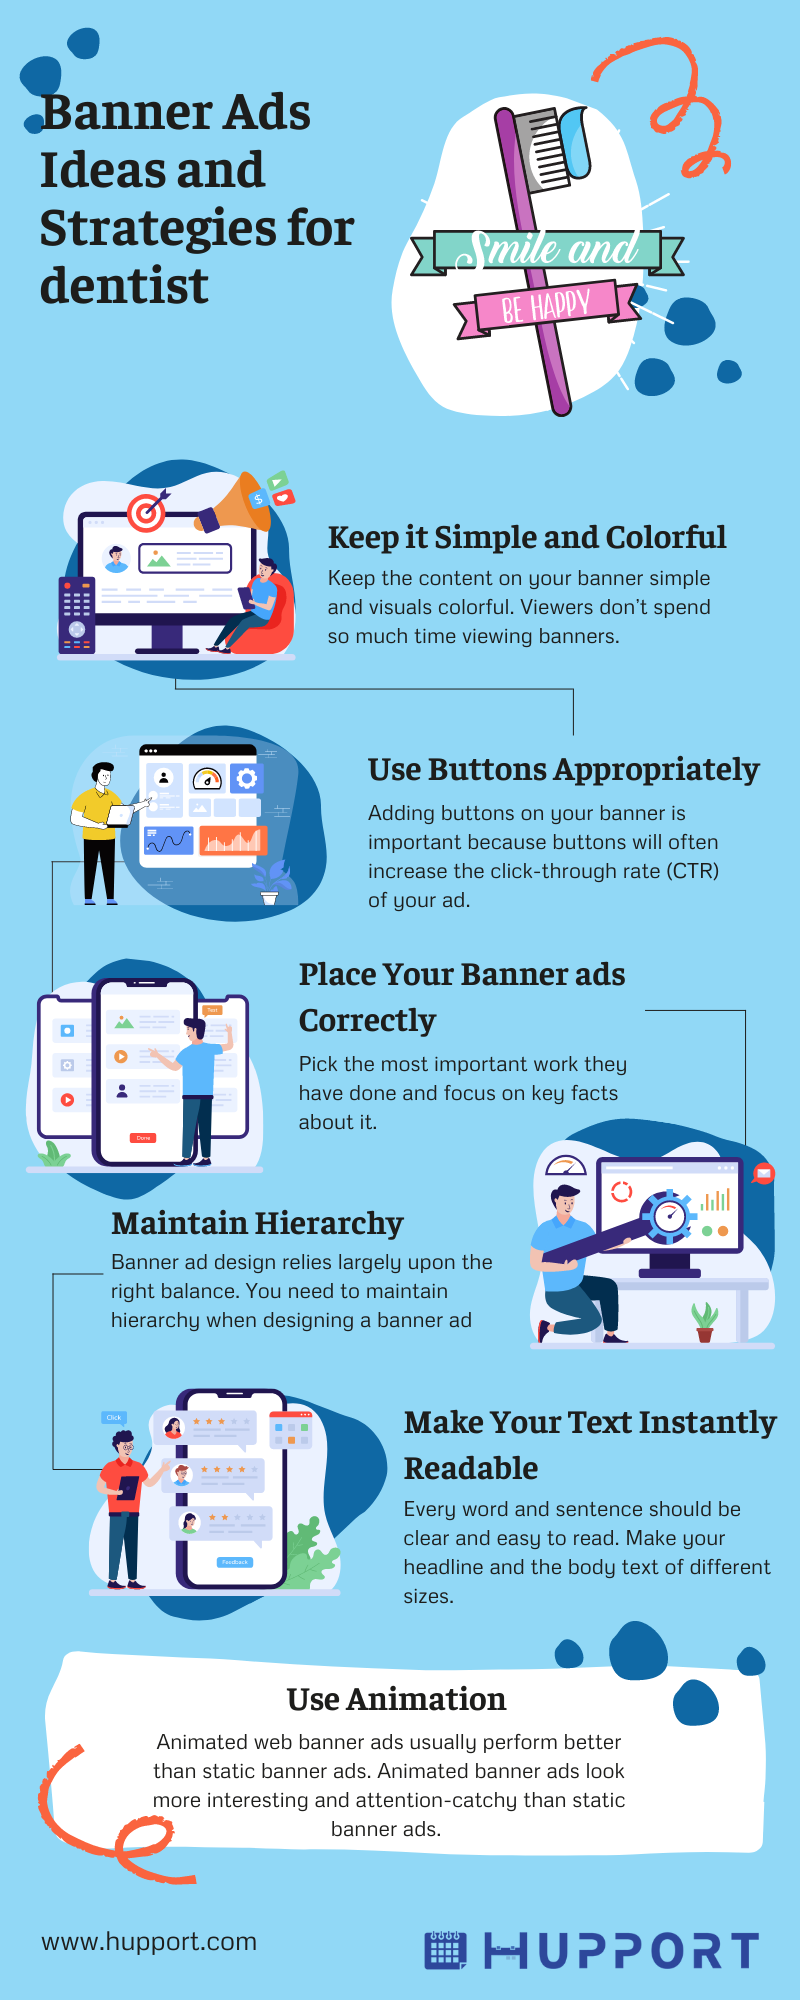 Banner Ads Ideas and Strategies for dentist